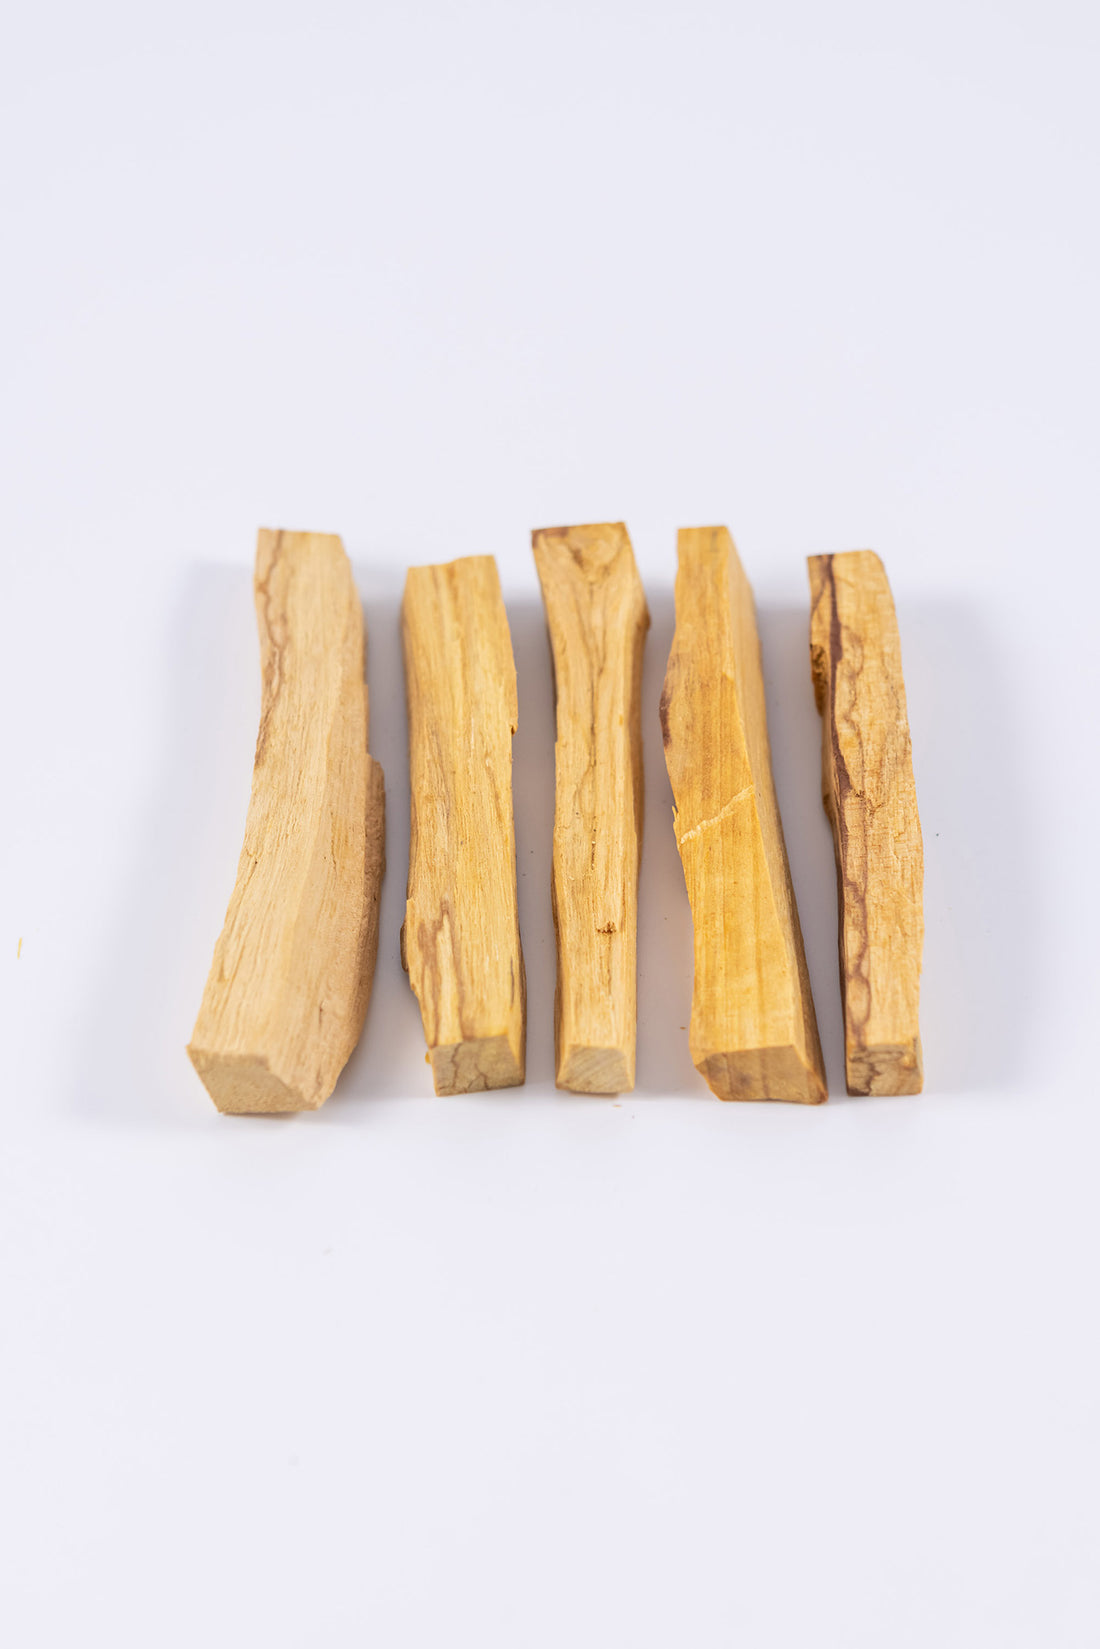 Ethically sourced palo santo sticks laid down in a row of similar but varying thicknesses